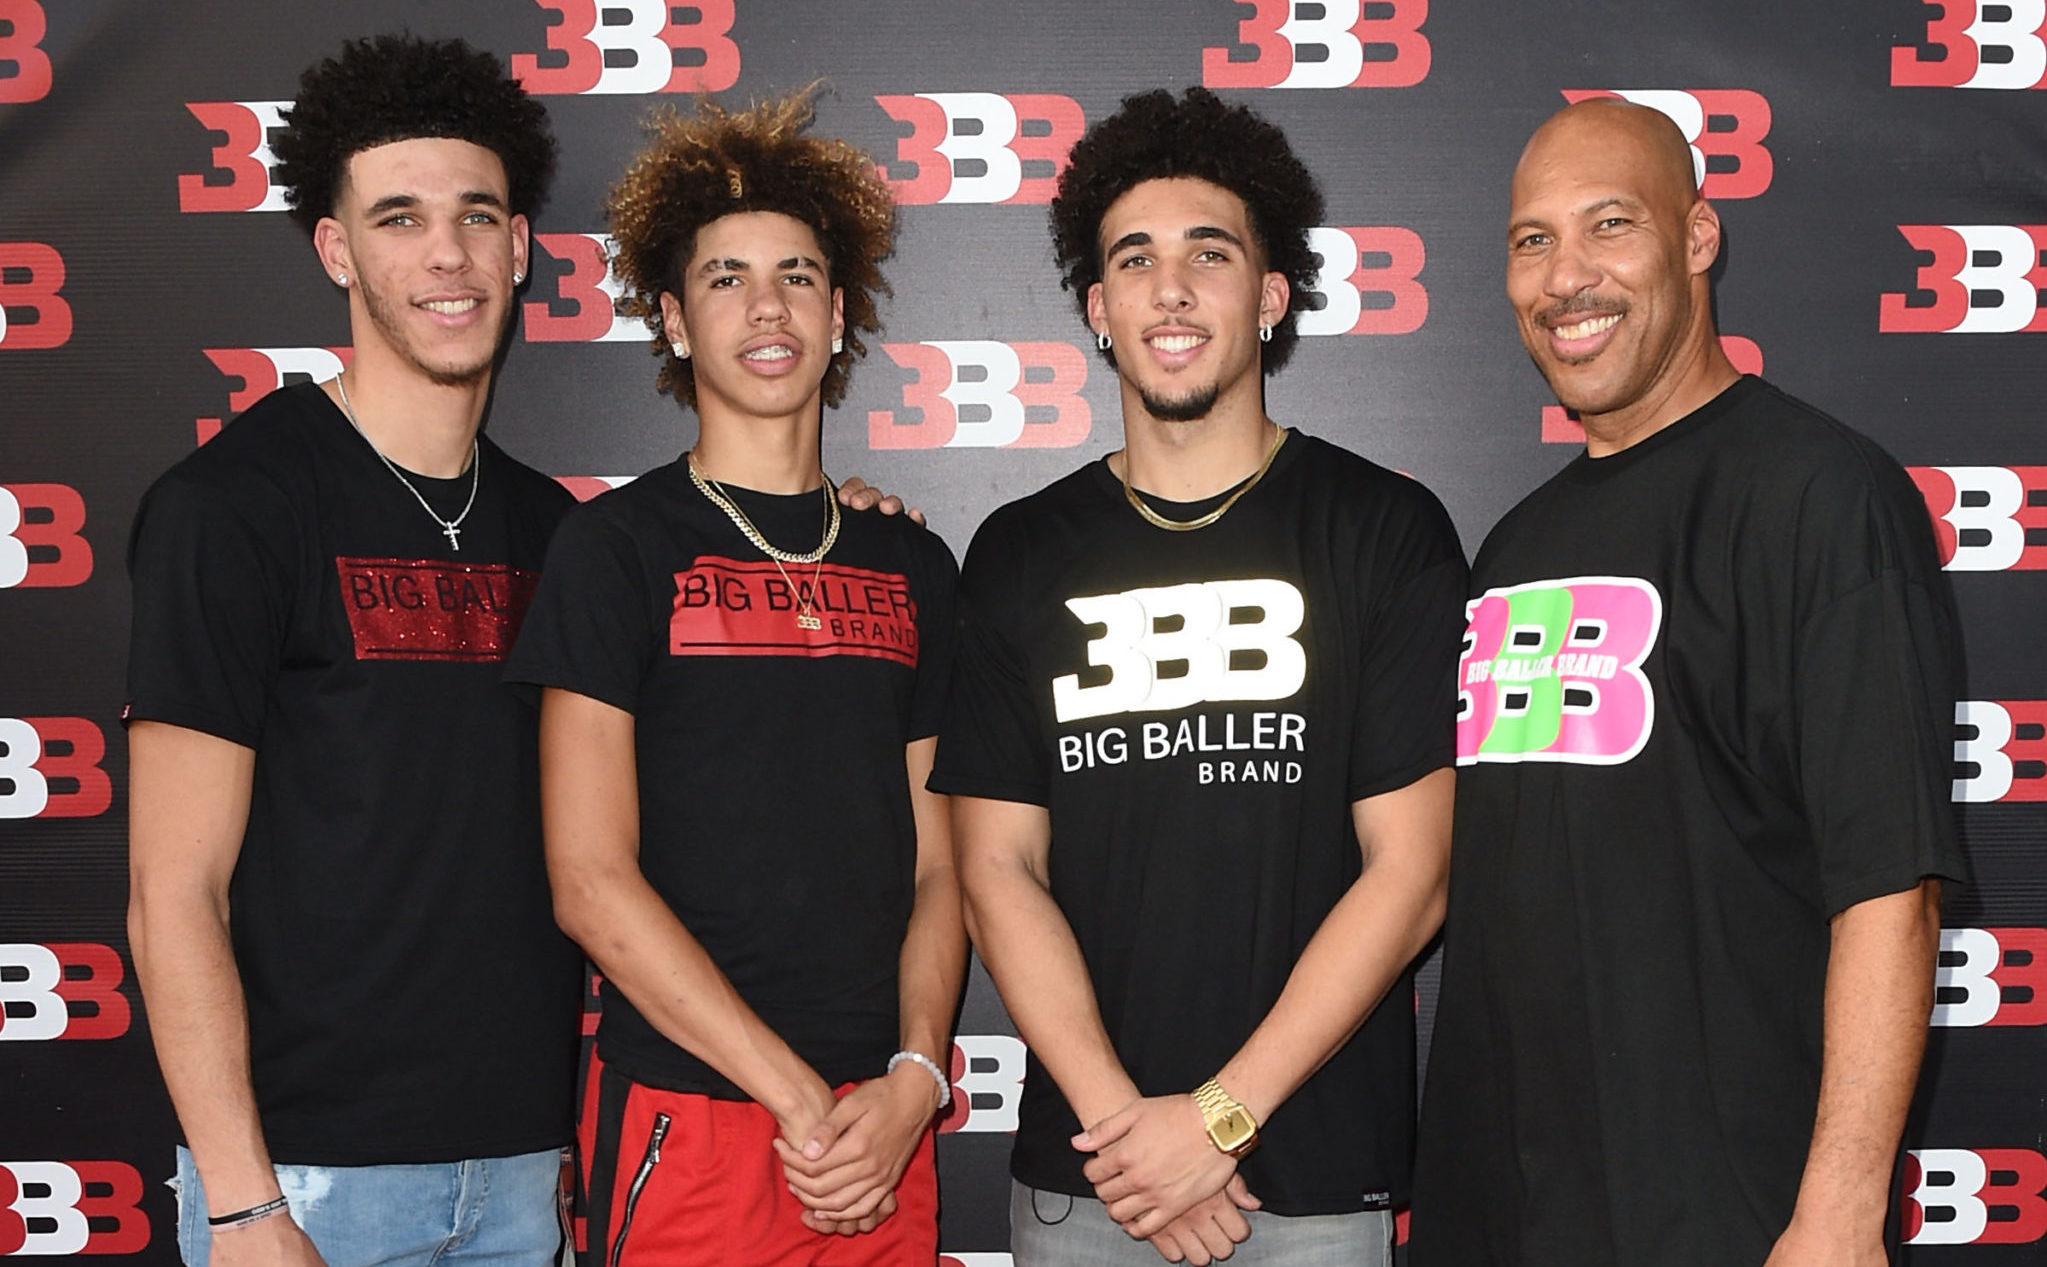 'I Told You So!': Lonzo and LaMelo Ball Have Made NBA Draft history